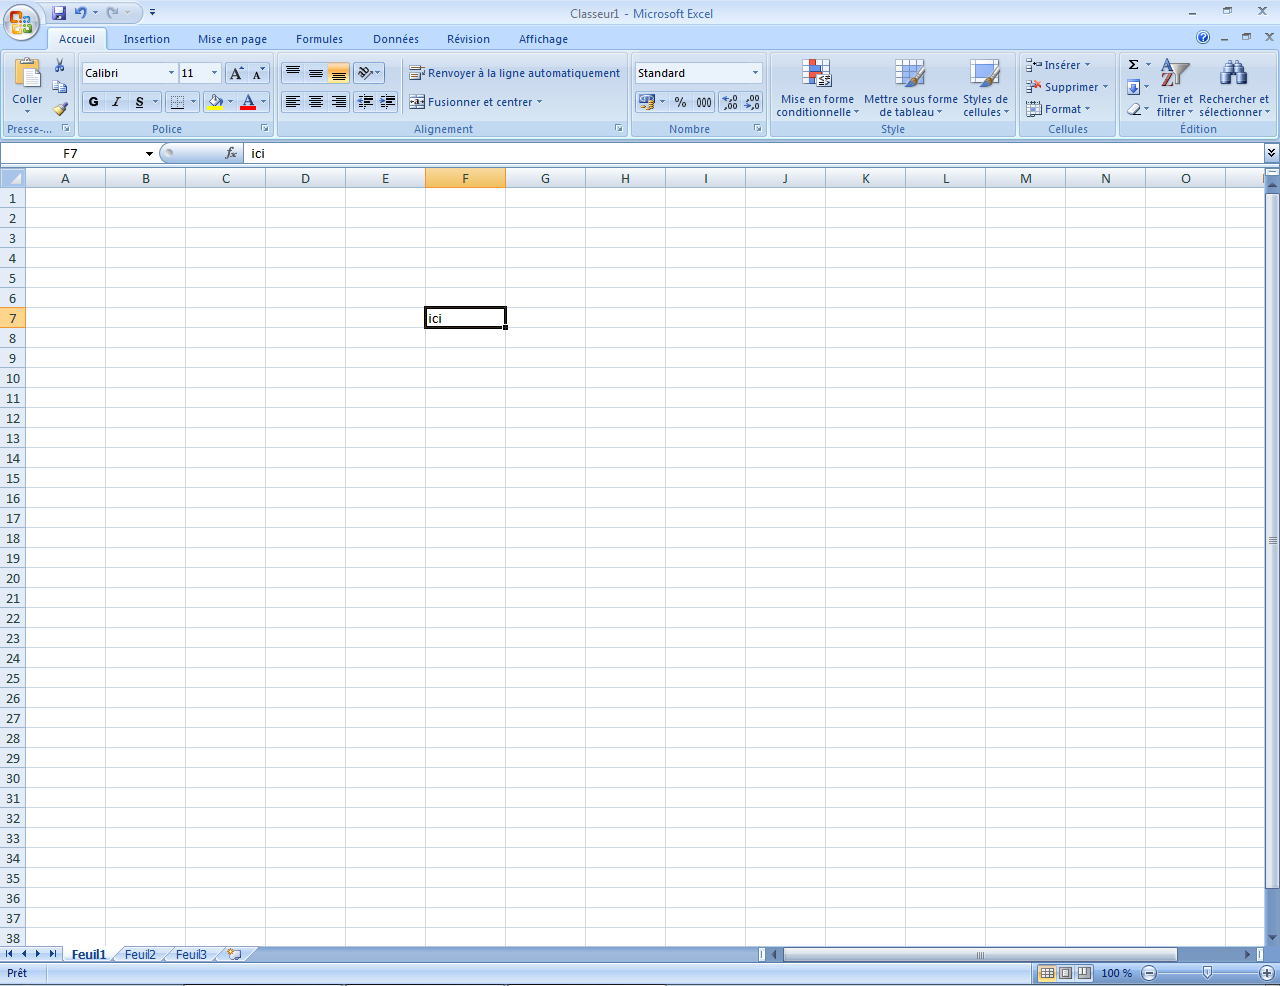 excel1